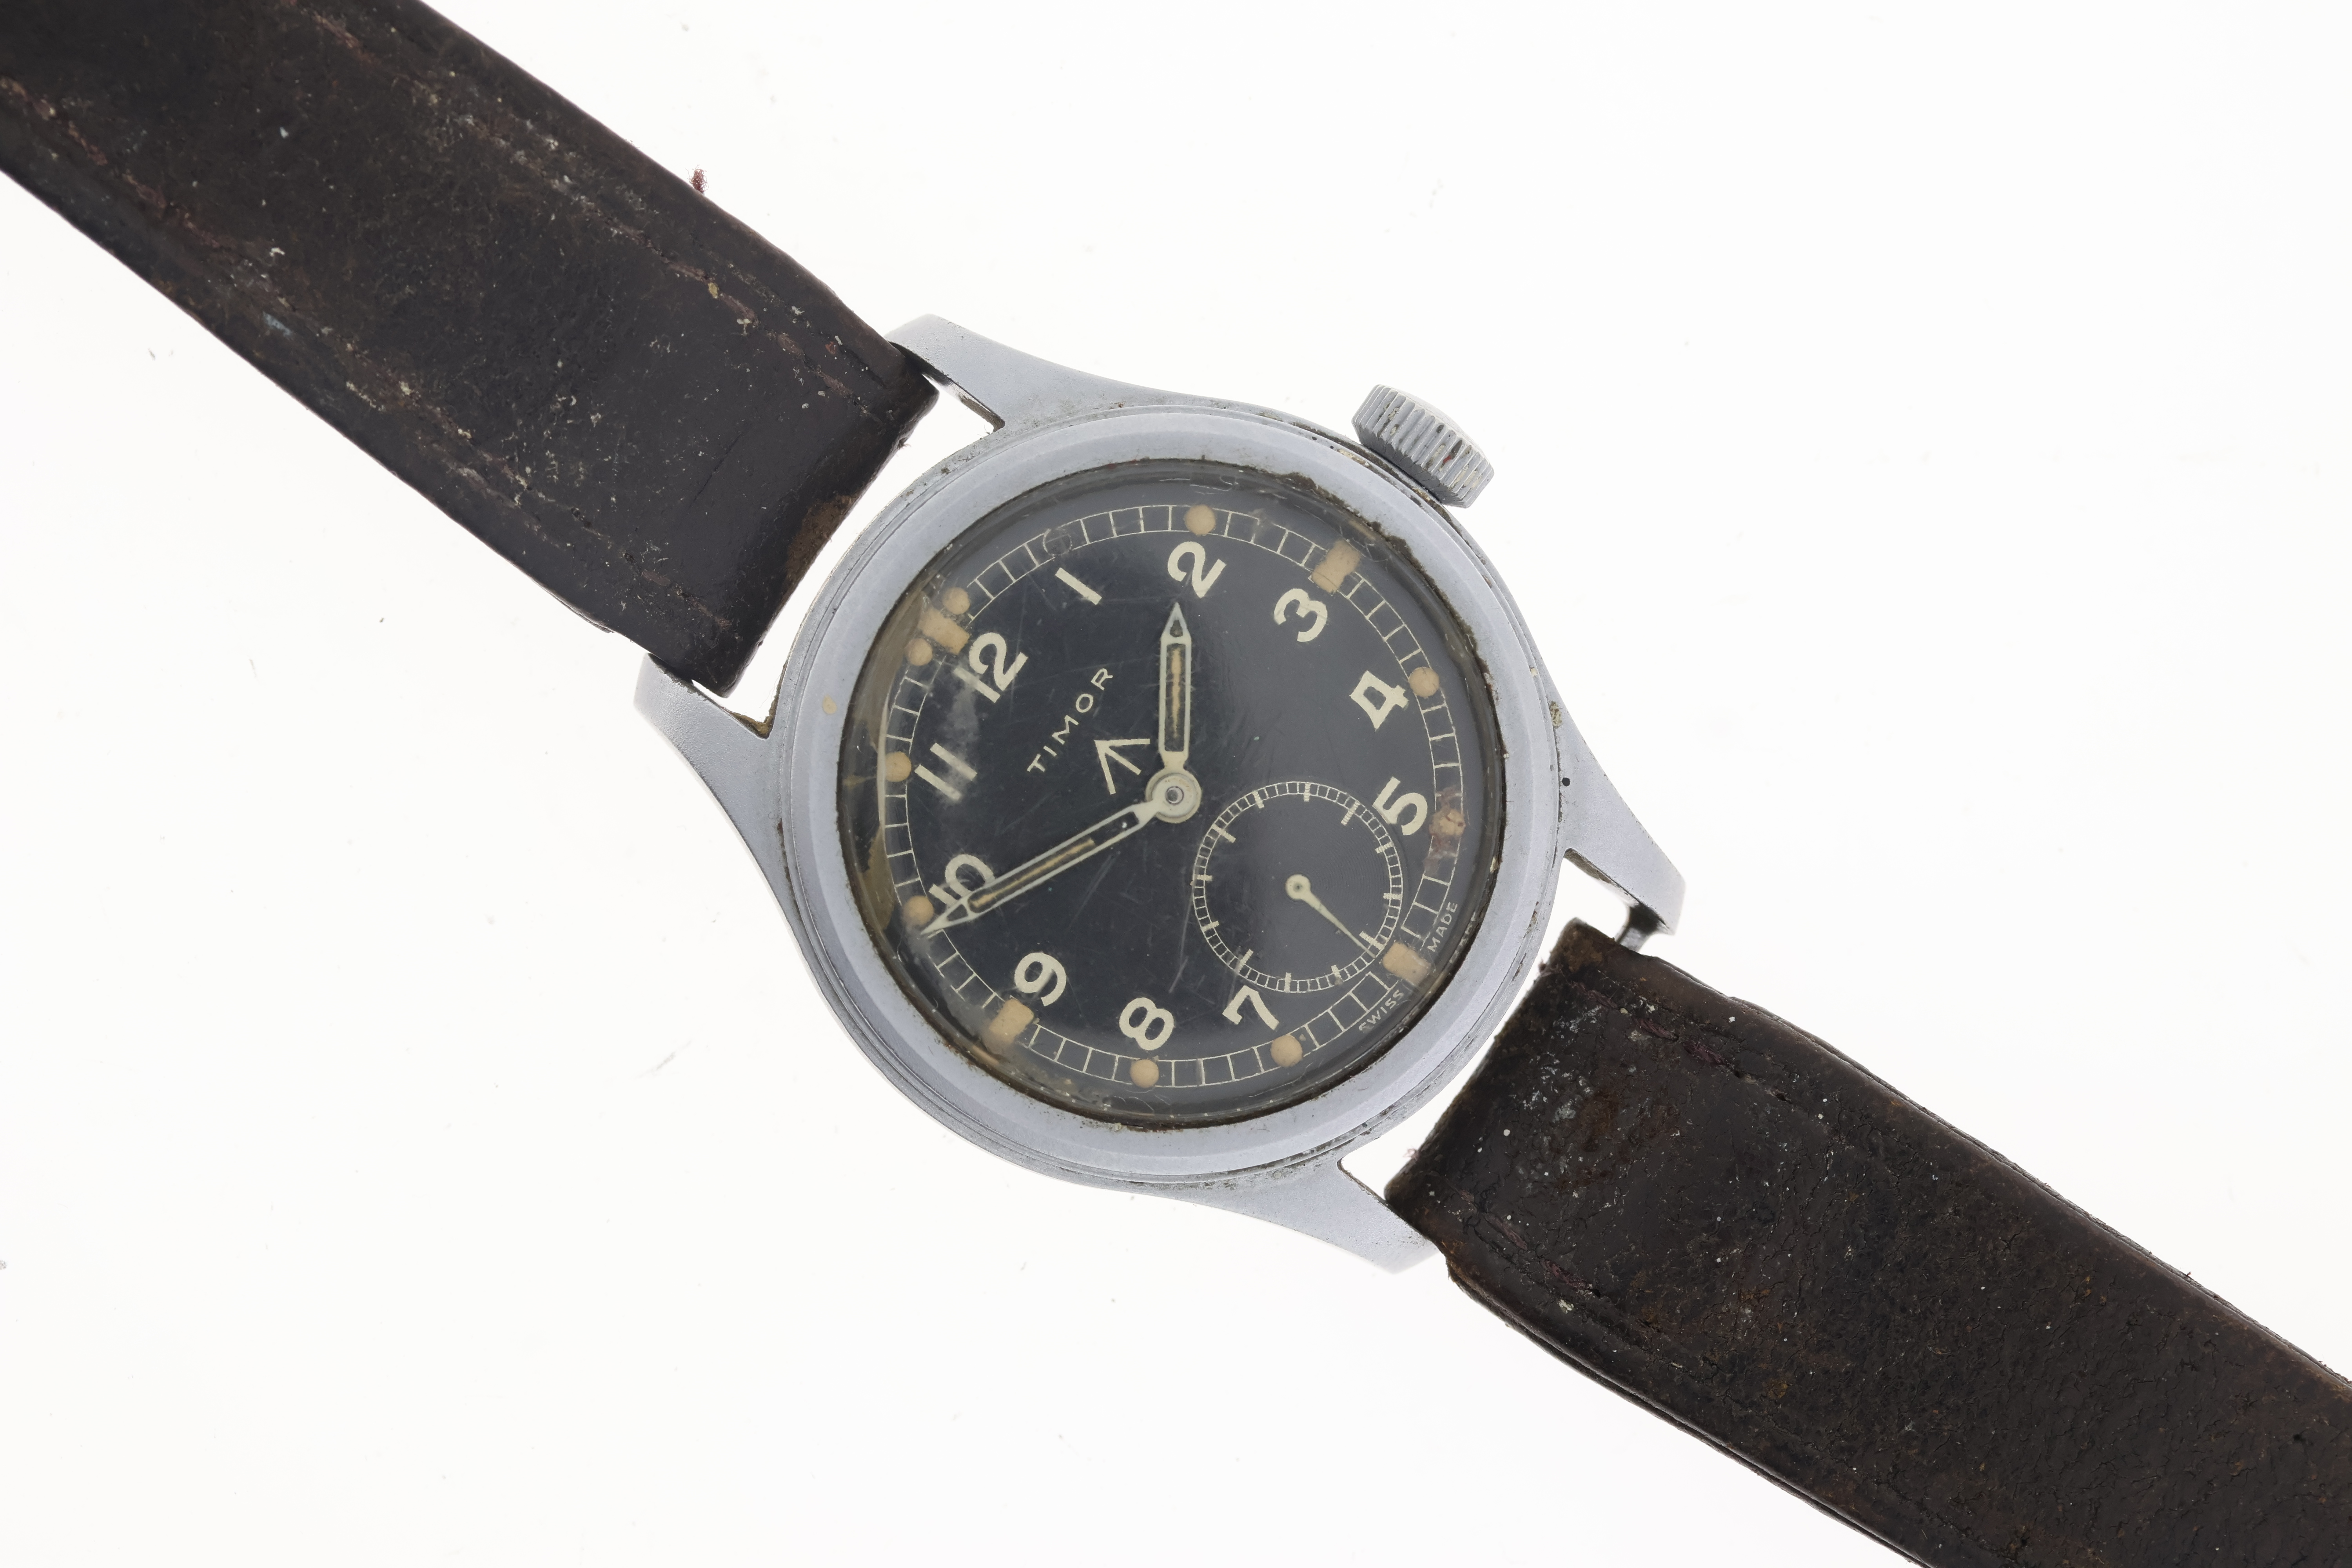 TIMOR WWW K 13708 / 43608. Case in very good condition for its age, age related wear as expected. - Image 3 of 4